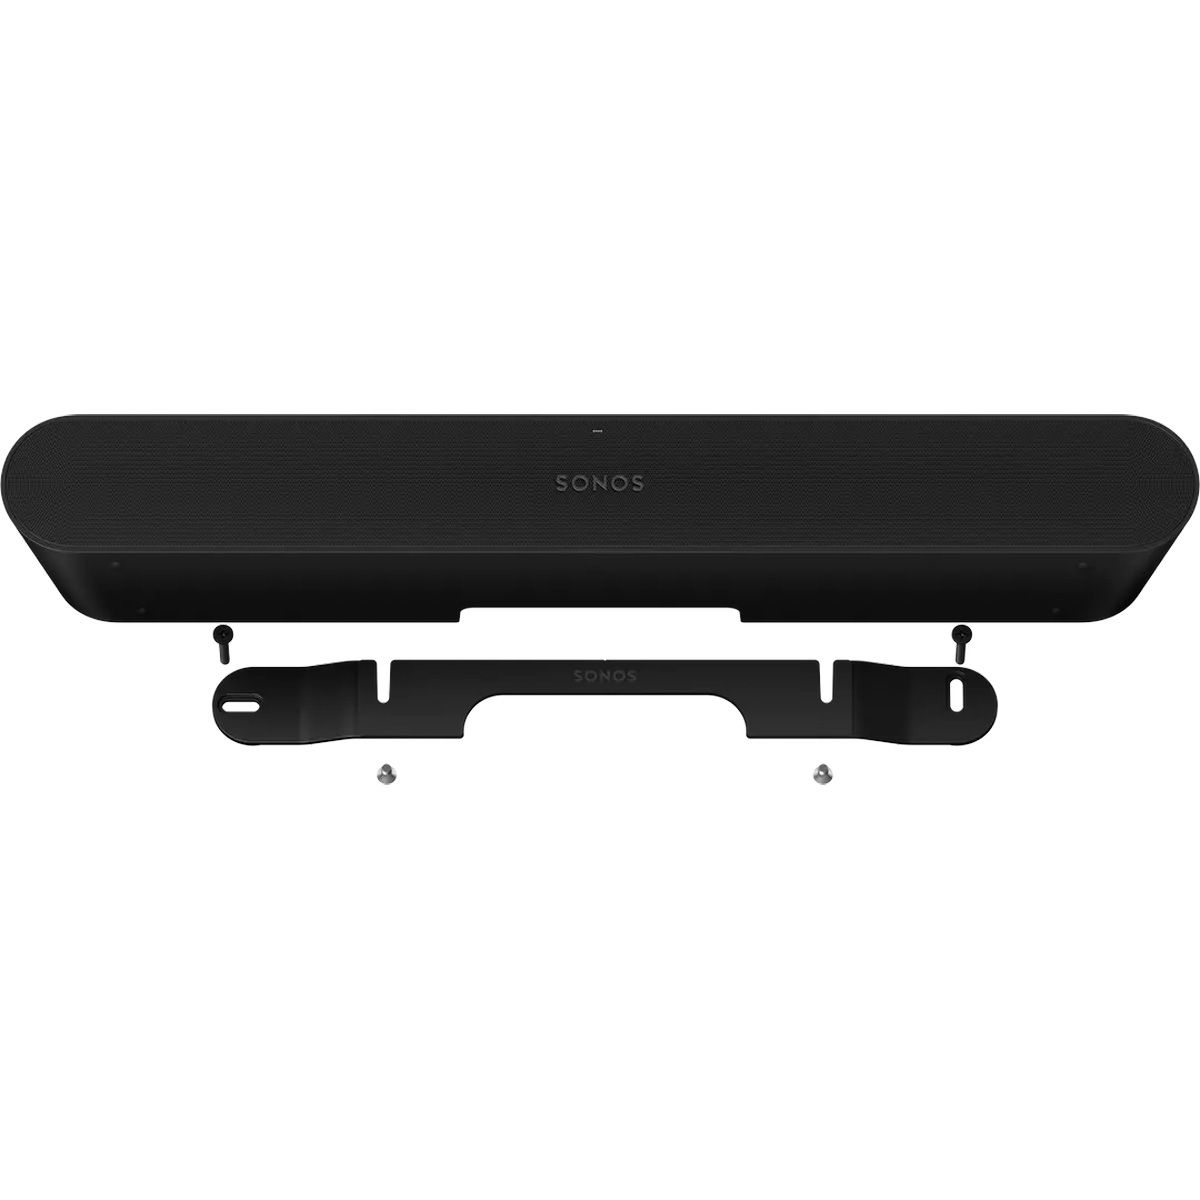 Sonos Ray Wall Mount - straight-ahead view with Ray